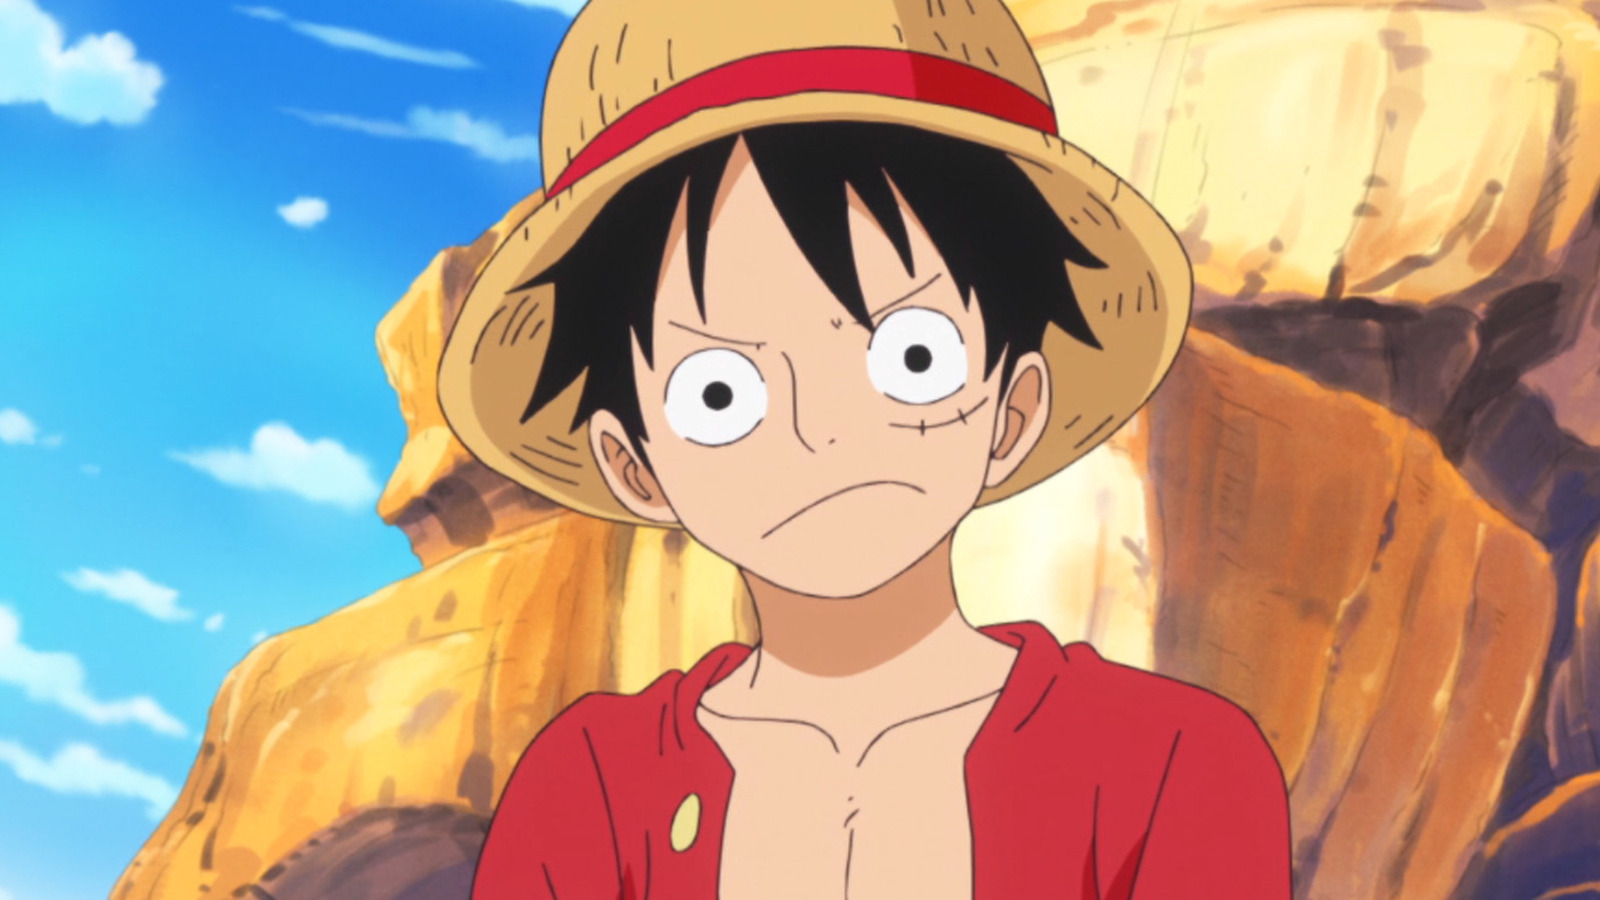 How Is One Piece The Best Thing There is?